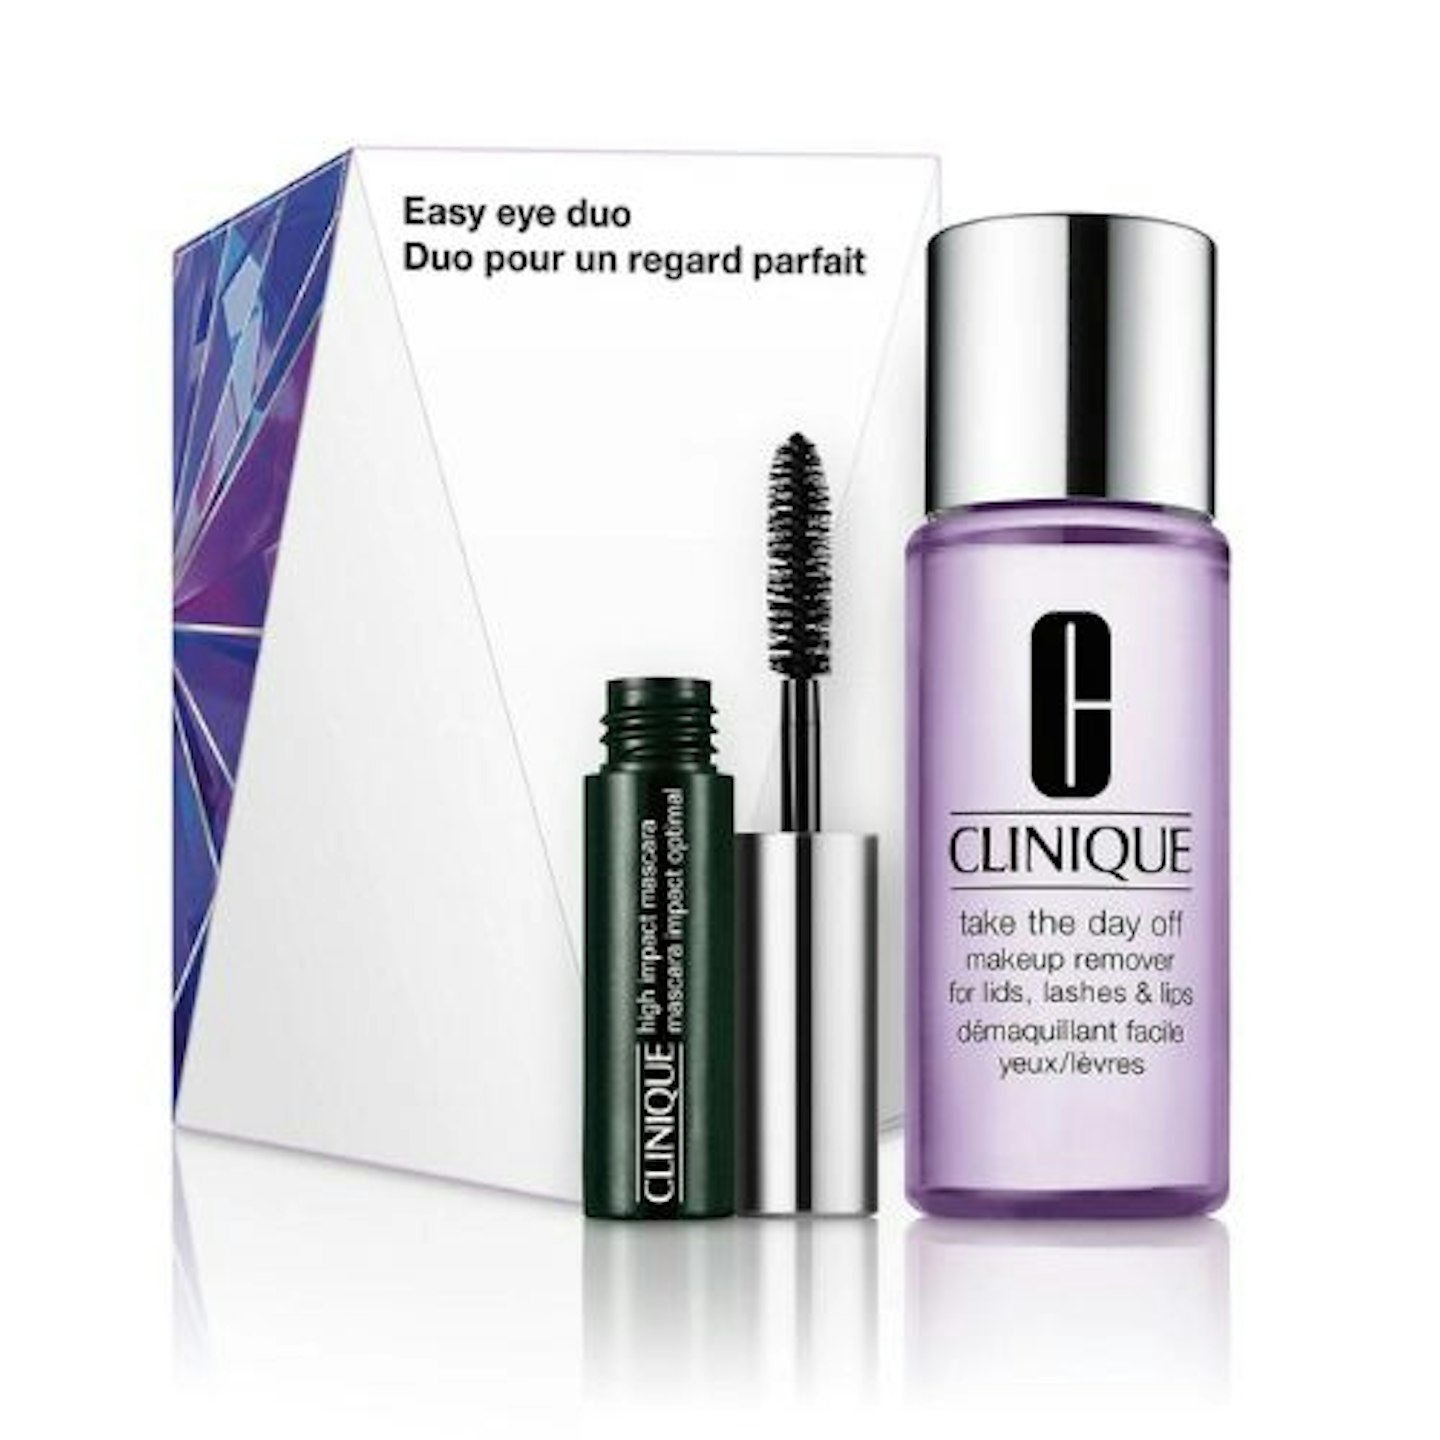  Clinique Easy Eye Duo Beauty Gift Set